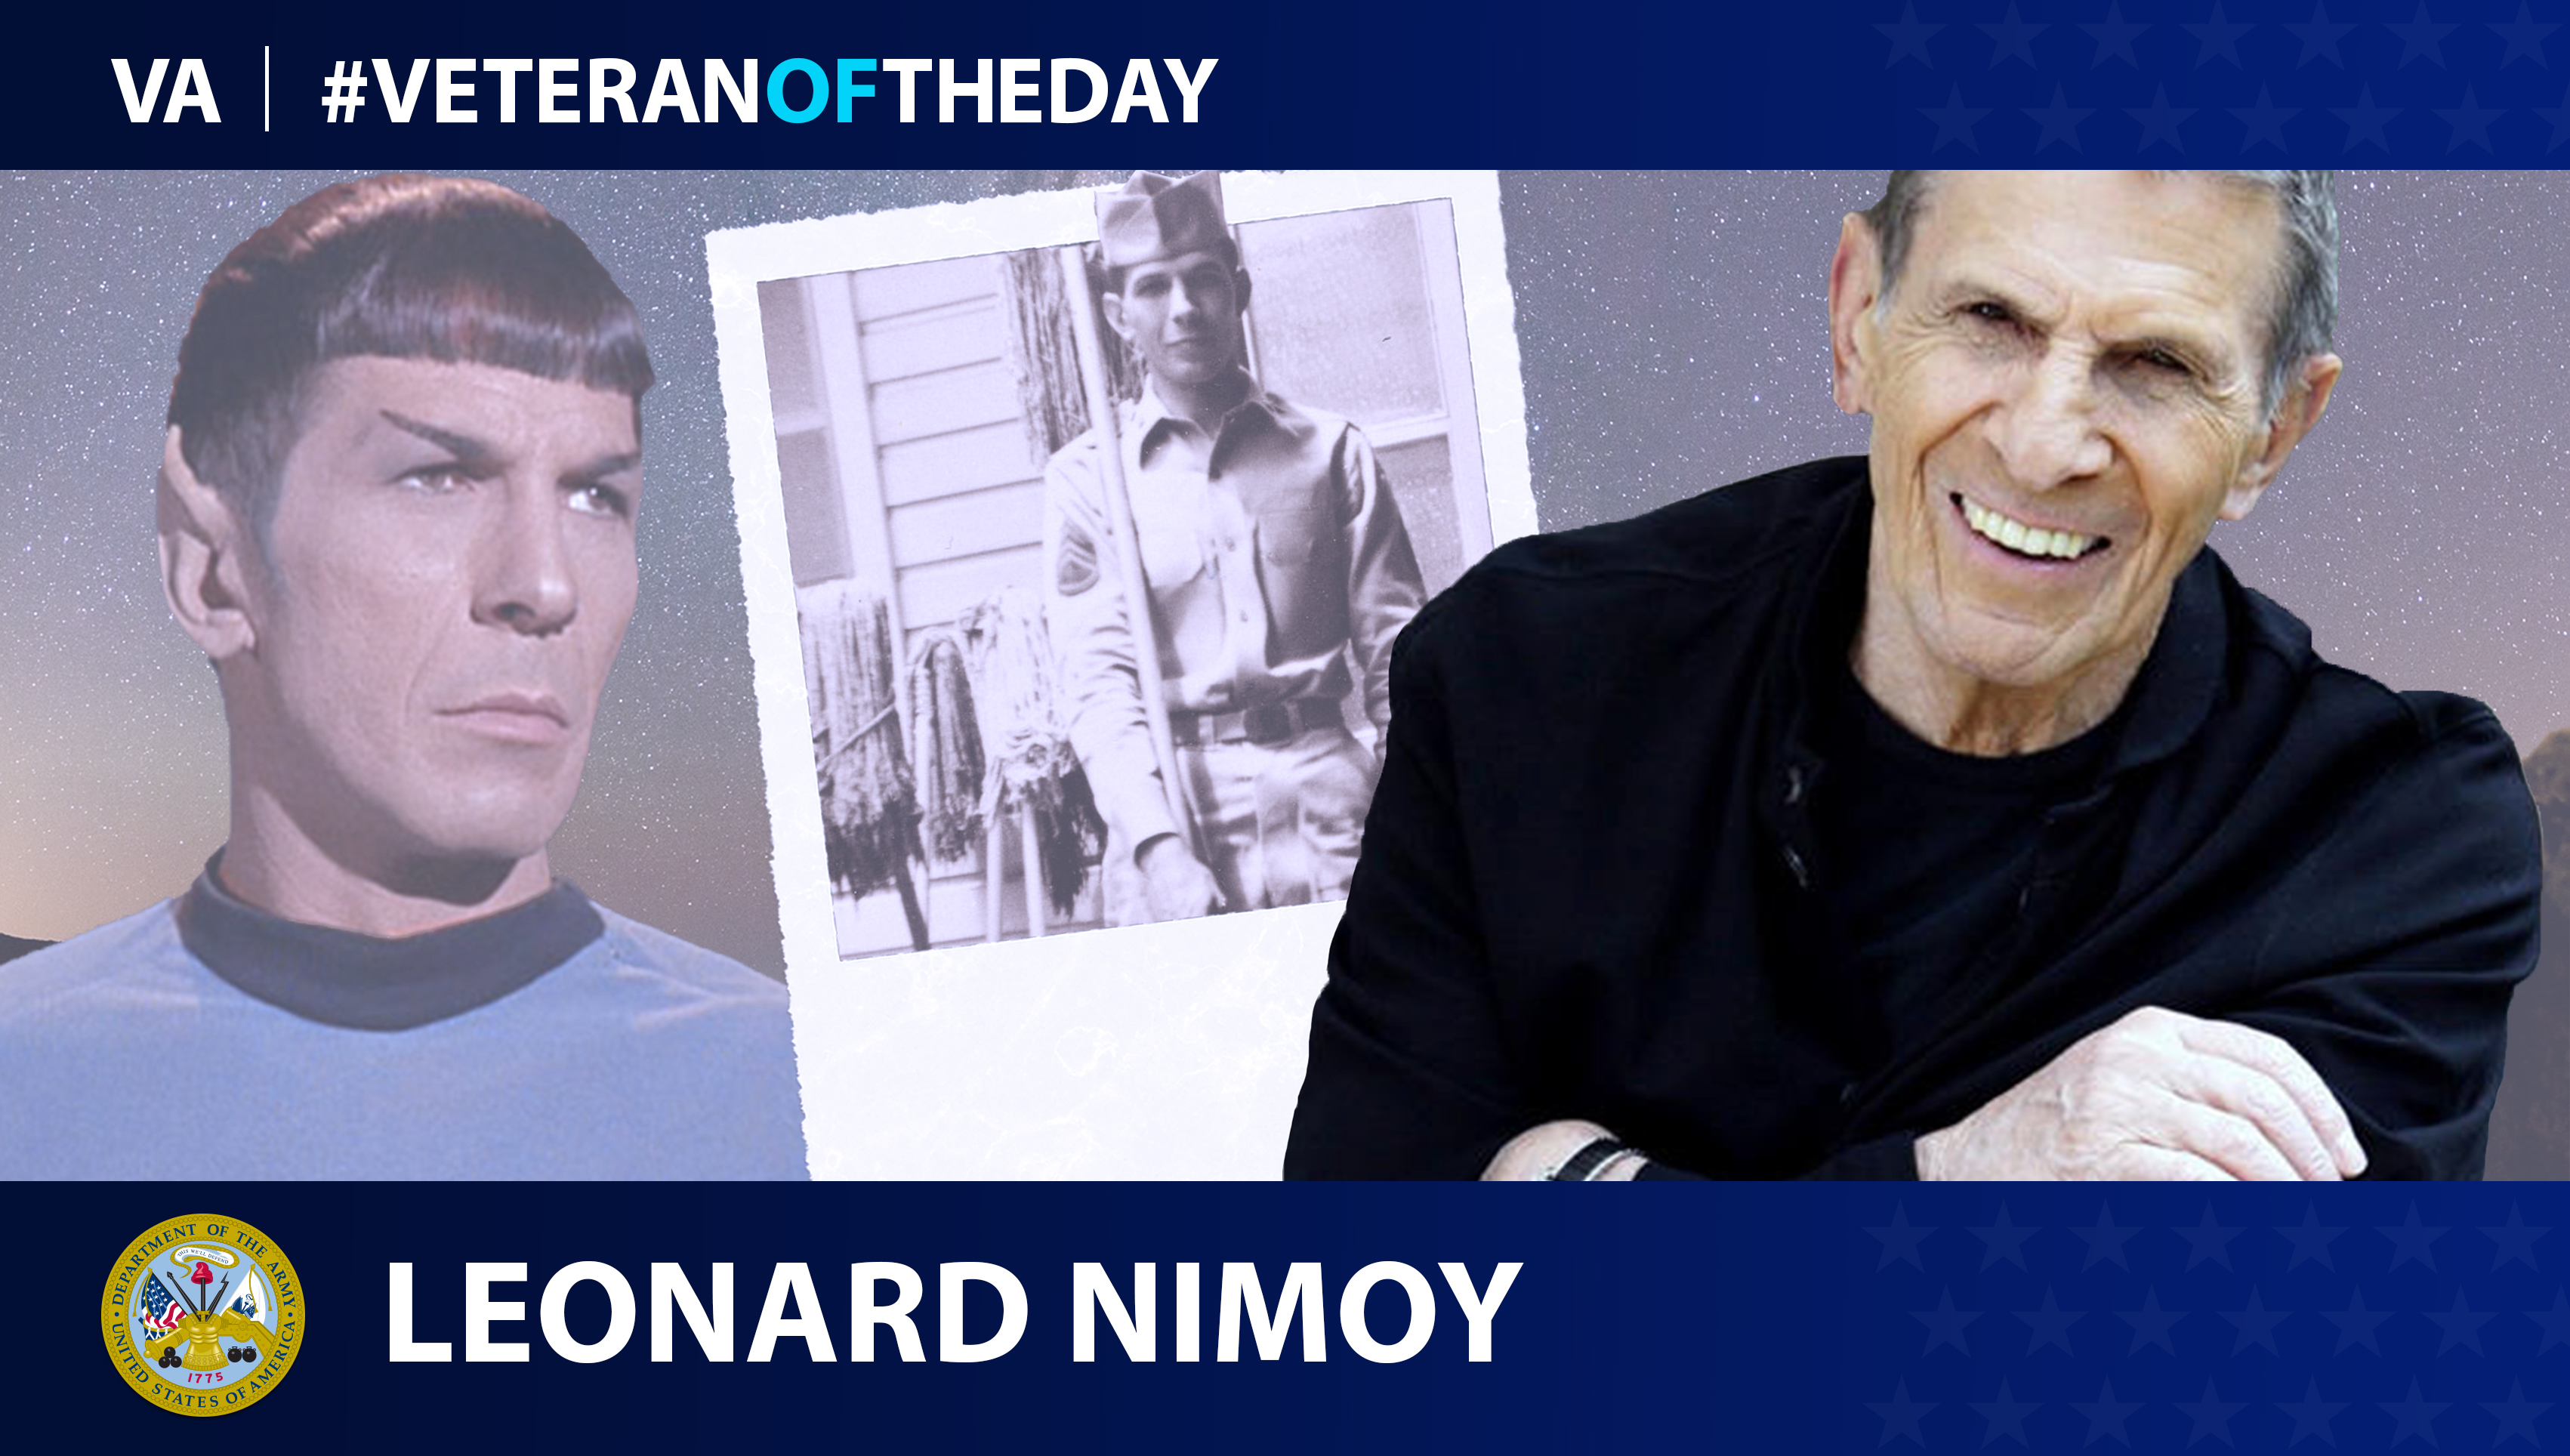 Army Veteran Leonard Nimoy is today's Veteran of the day.